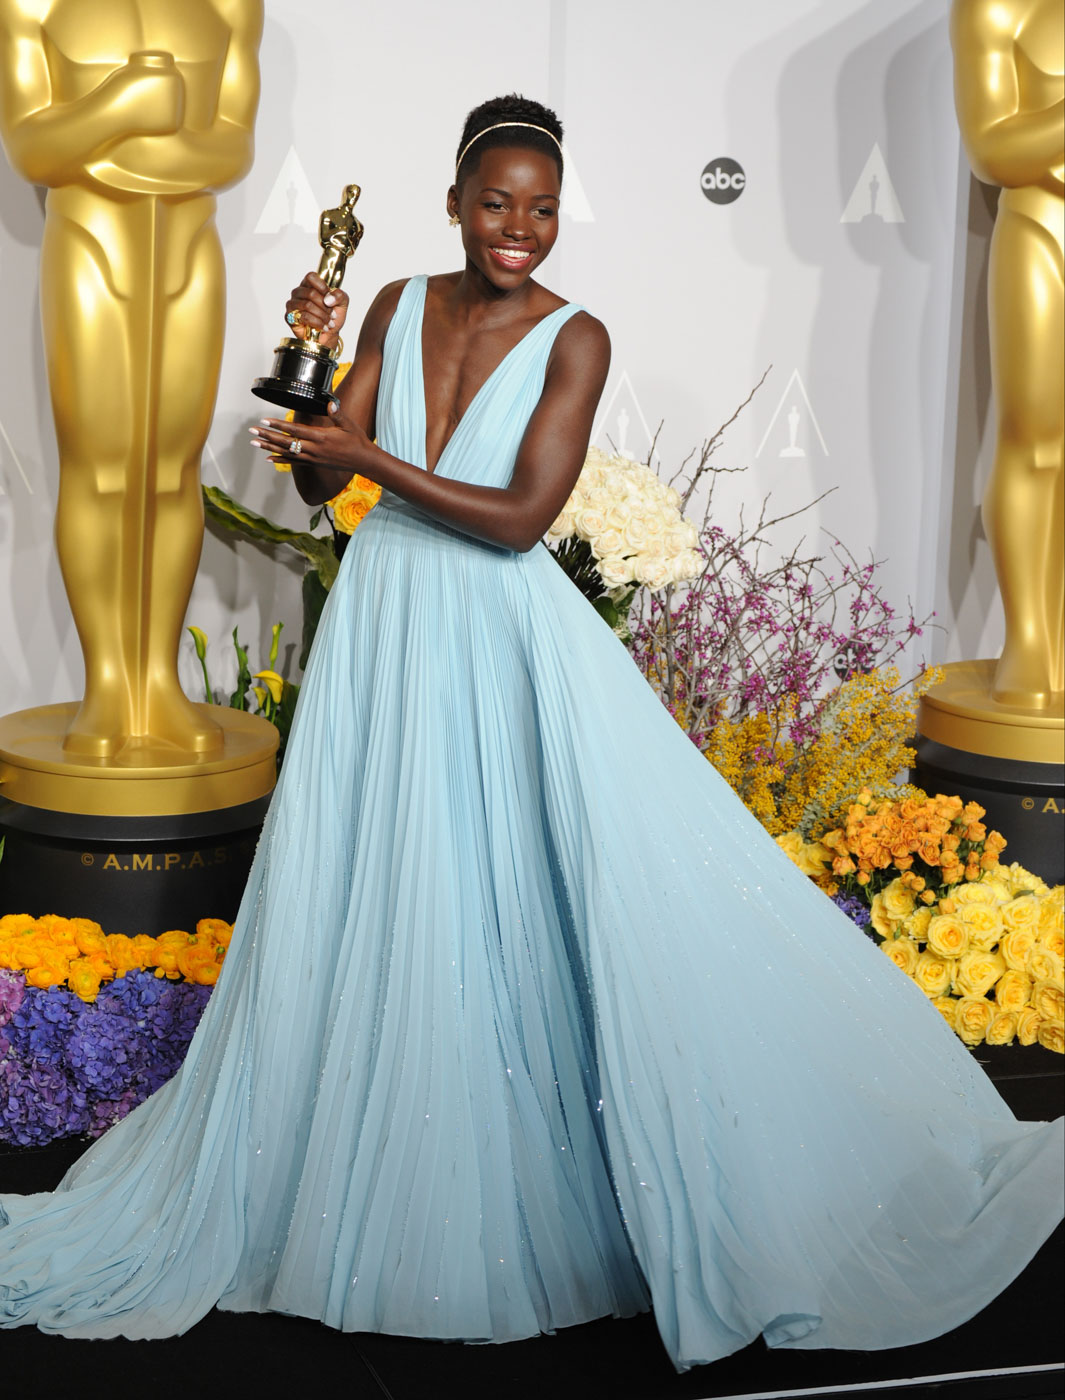 IN PHOTOS The most dresses in Oscars red carpet history